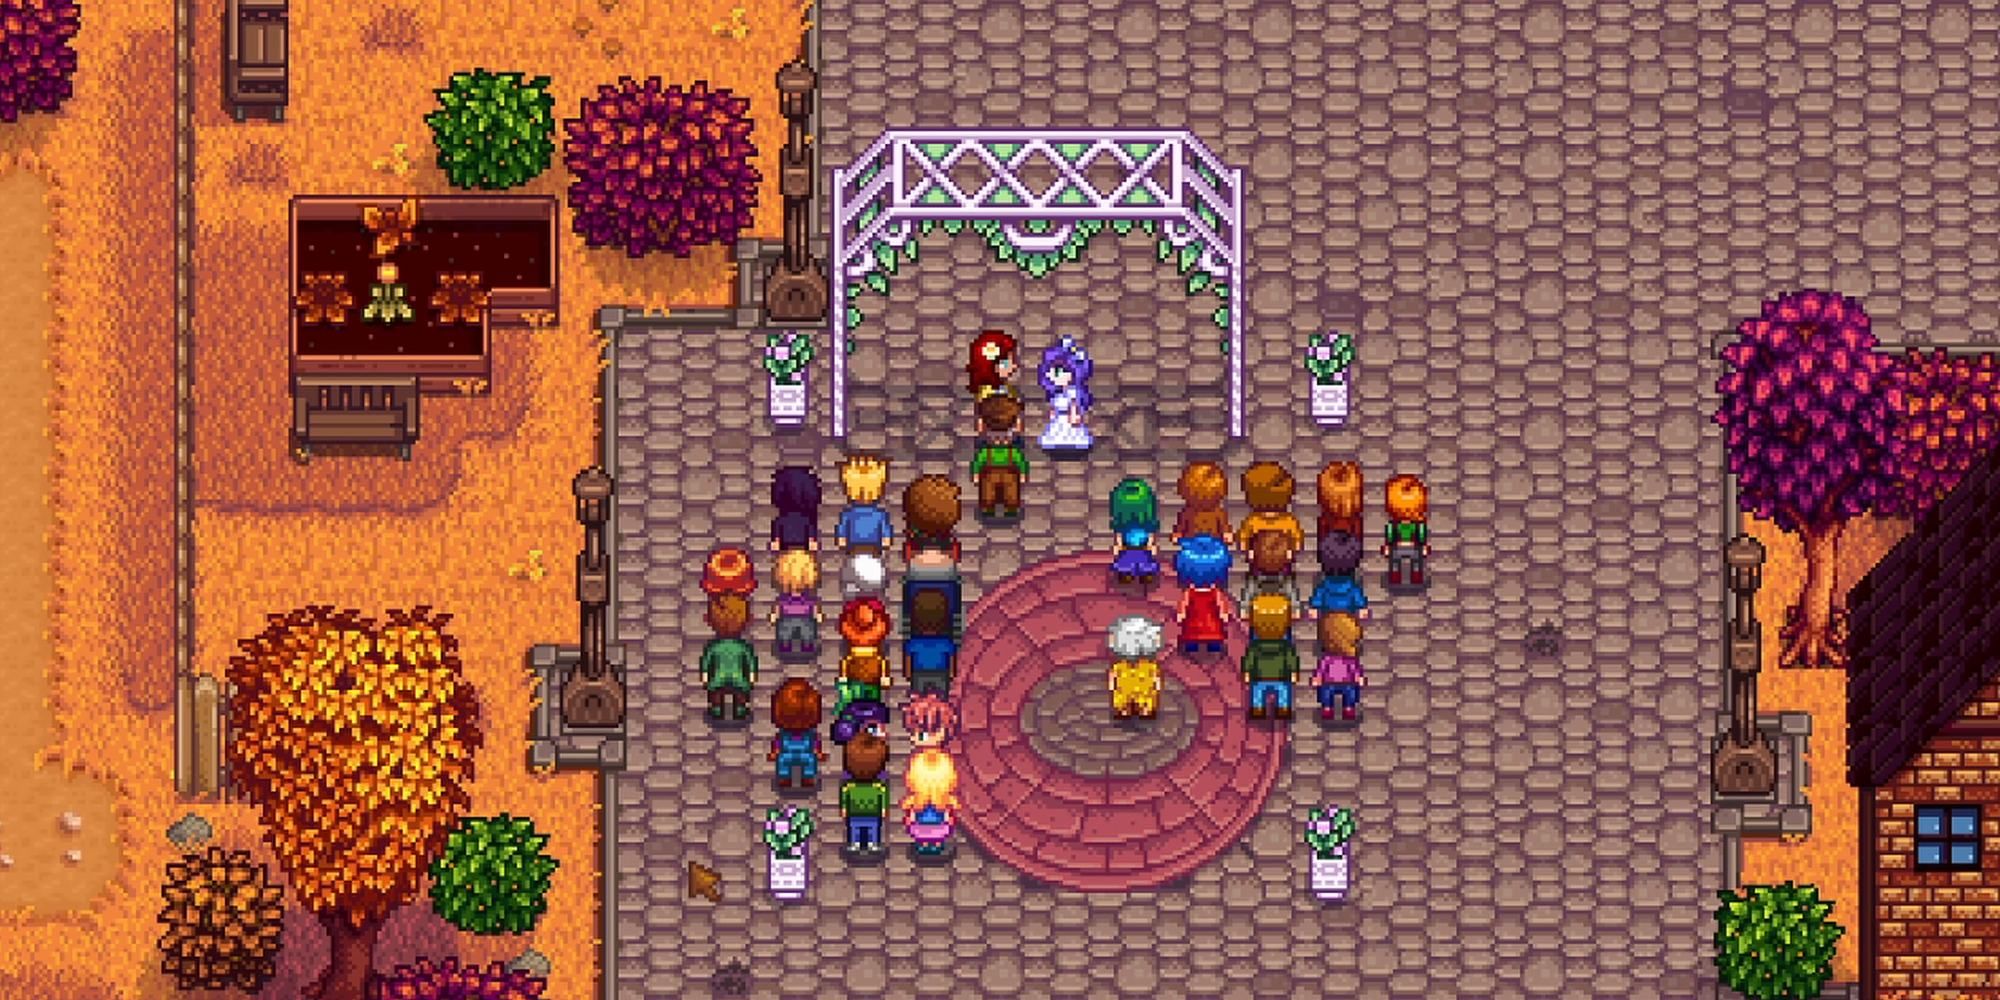 Stardew Valley's wedding ceremony between a player and an NPC villager